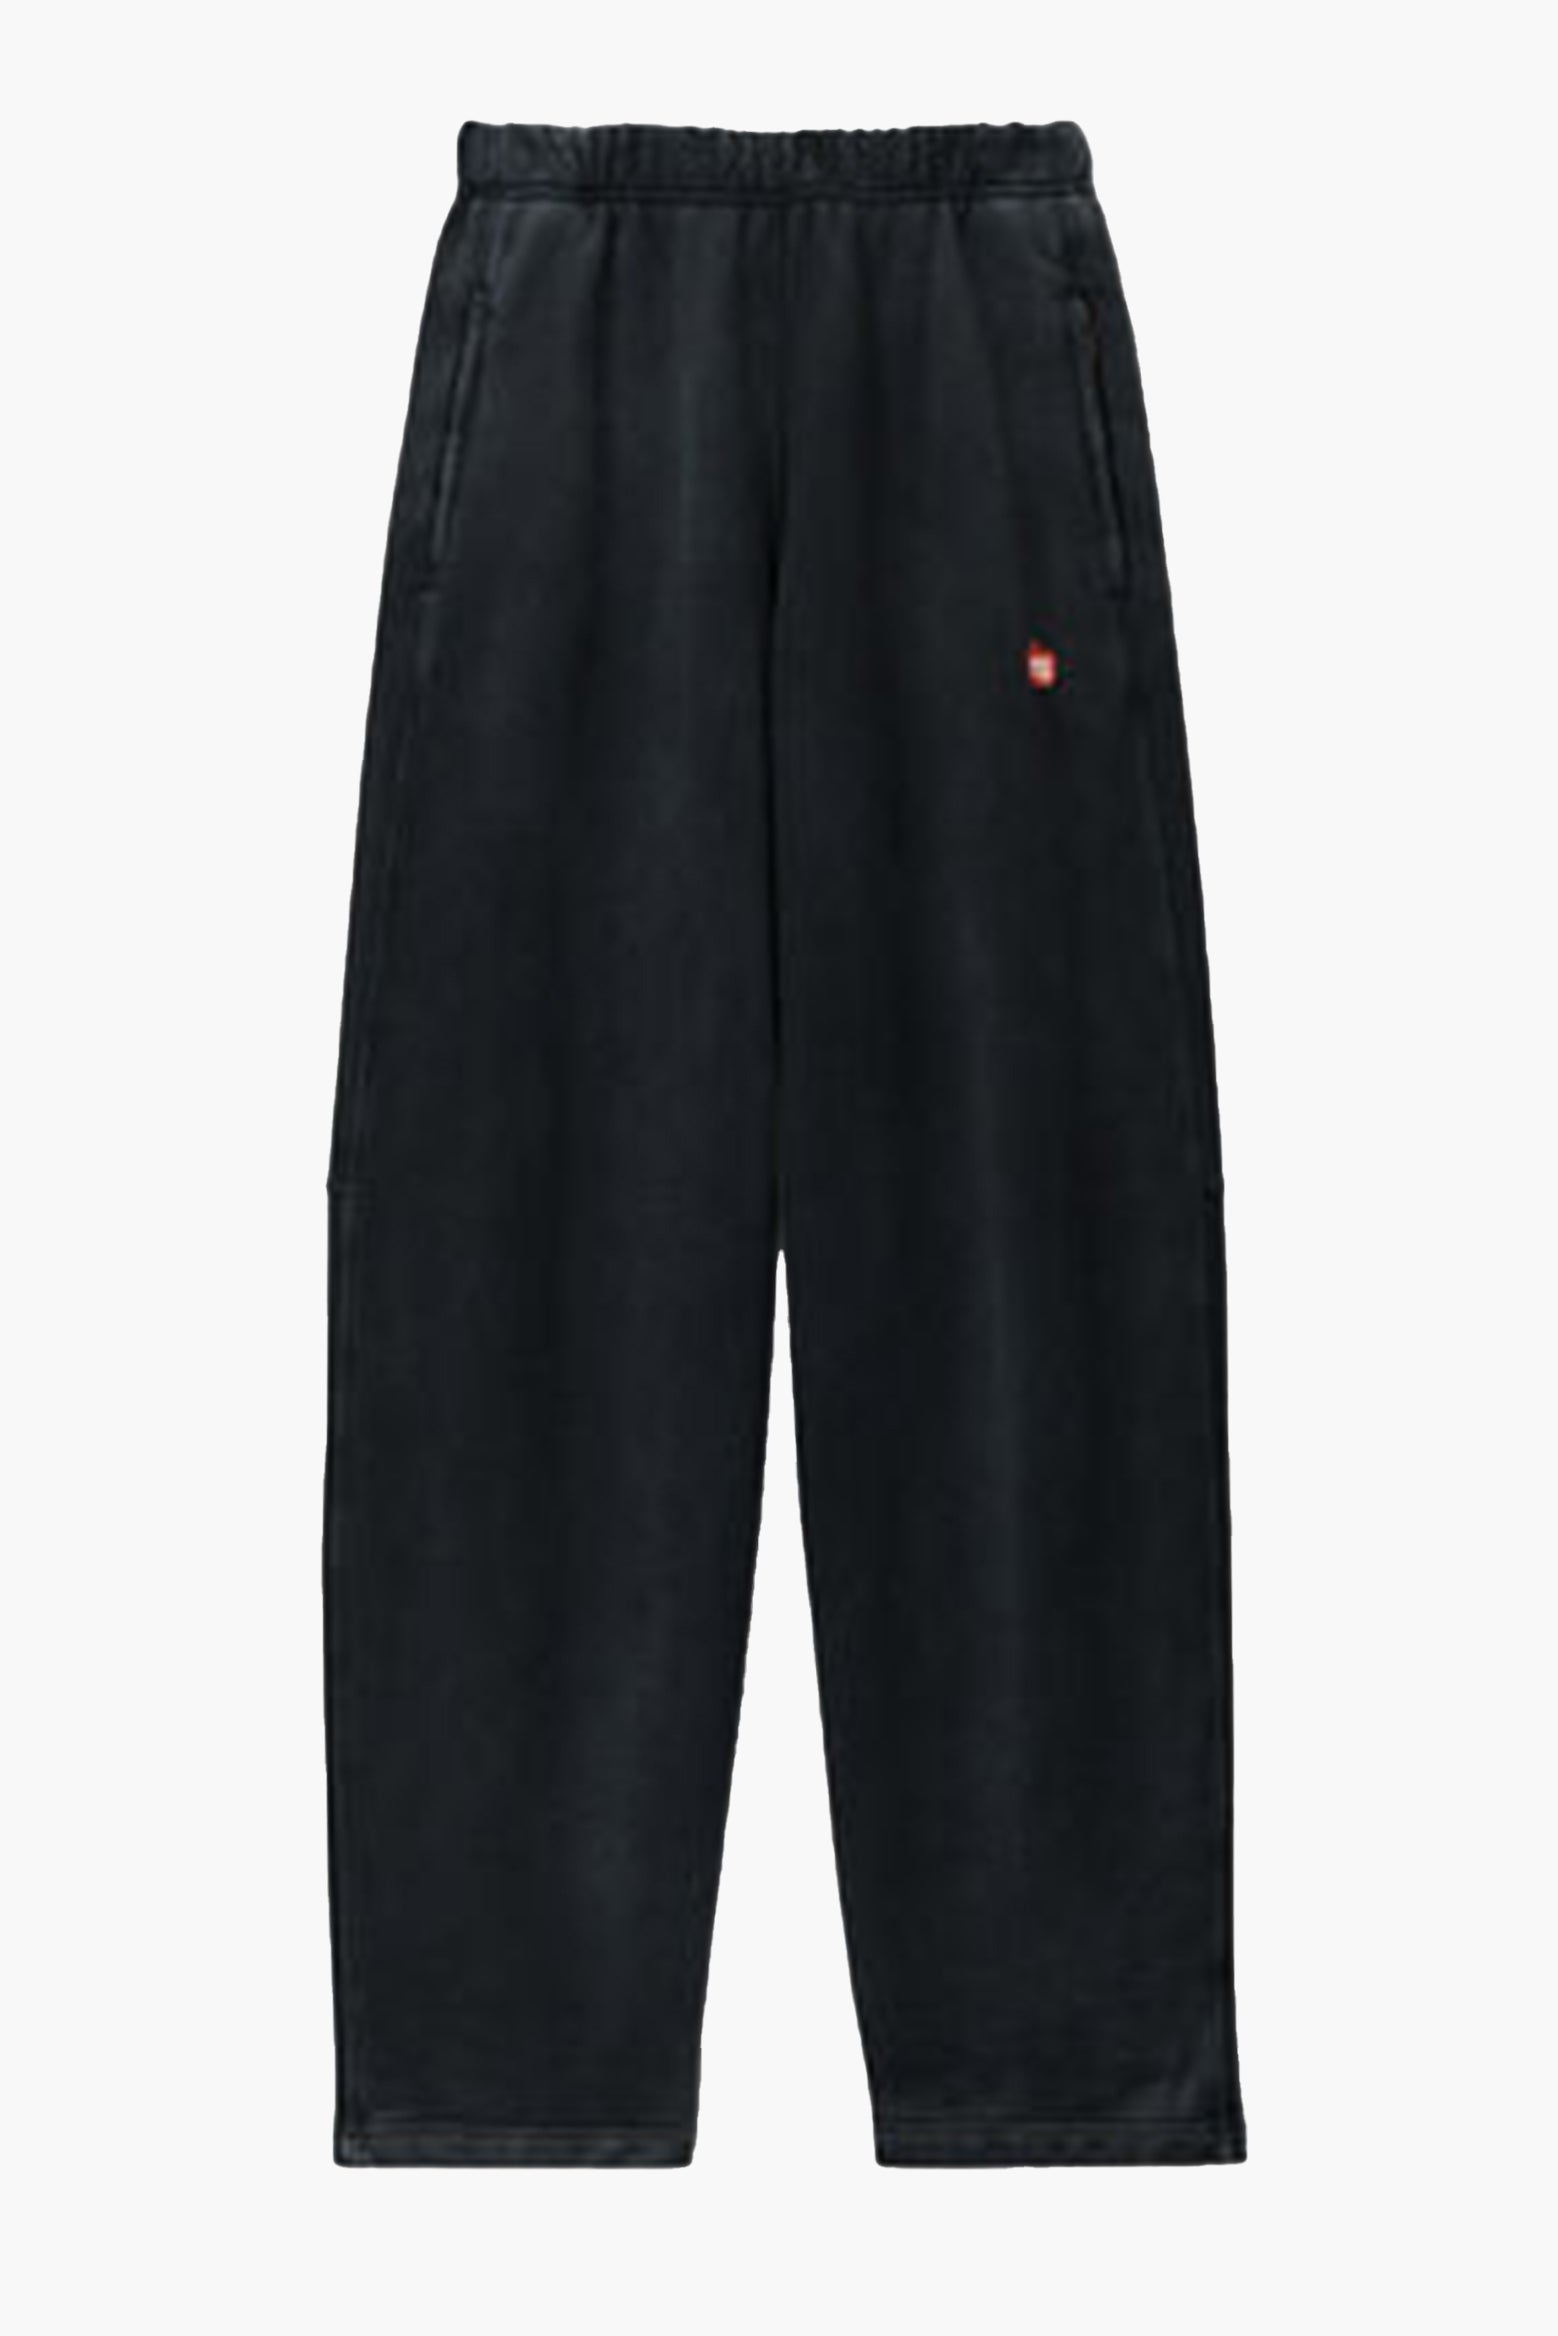 The Alexander Wang High Waist Sweatpant with Pigment Wash & Apple Puff in Washed Jet available at The New Trend. 